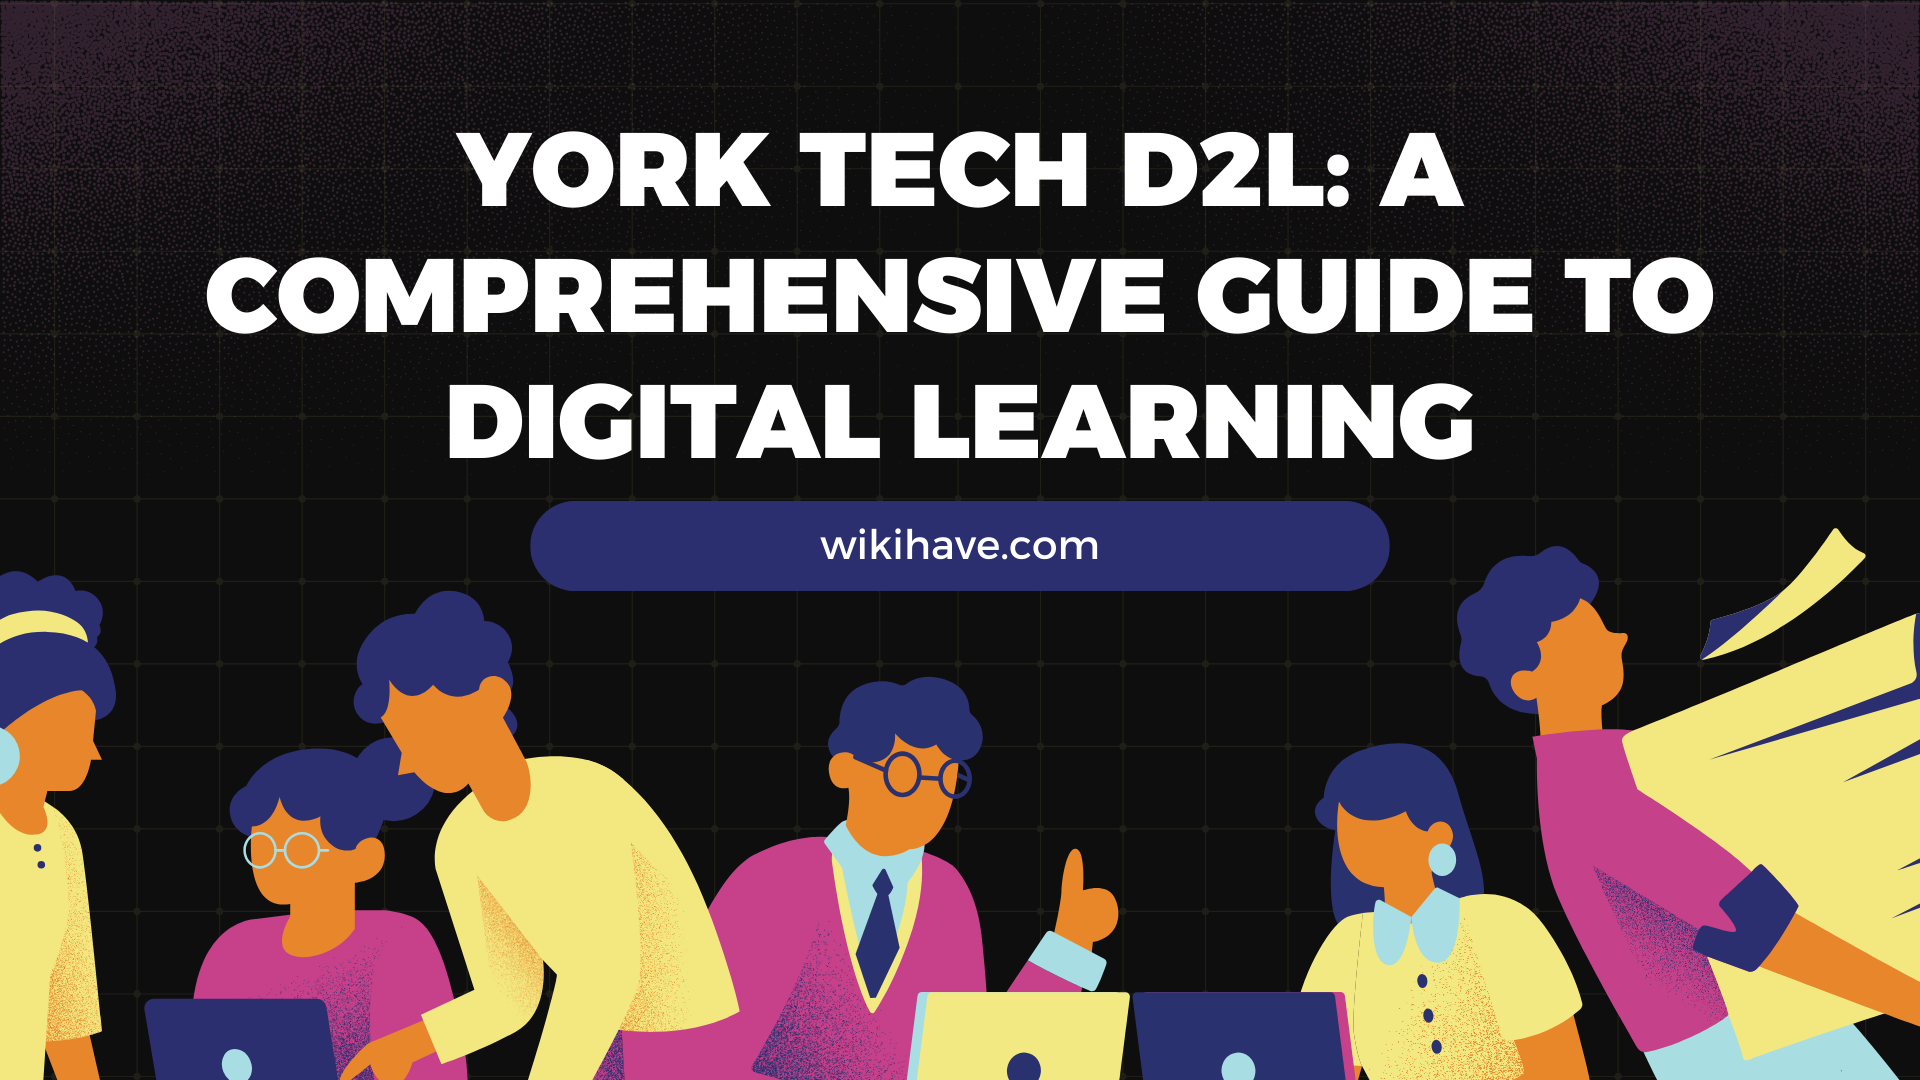 York Tech D2L: A Comprehensive Guide to Digital Learning